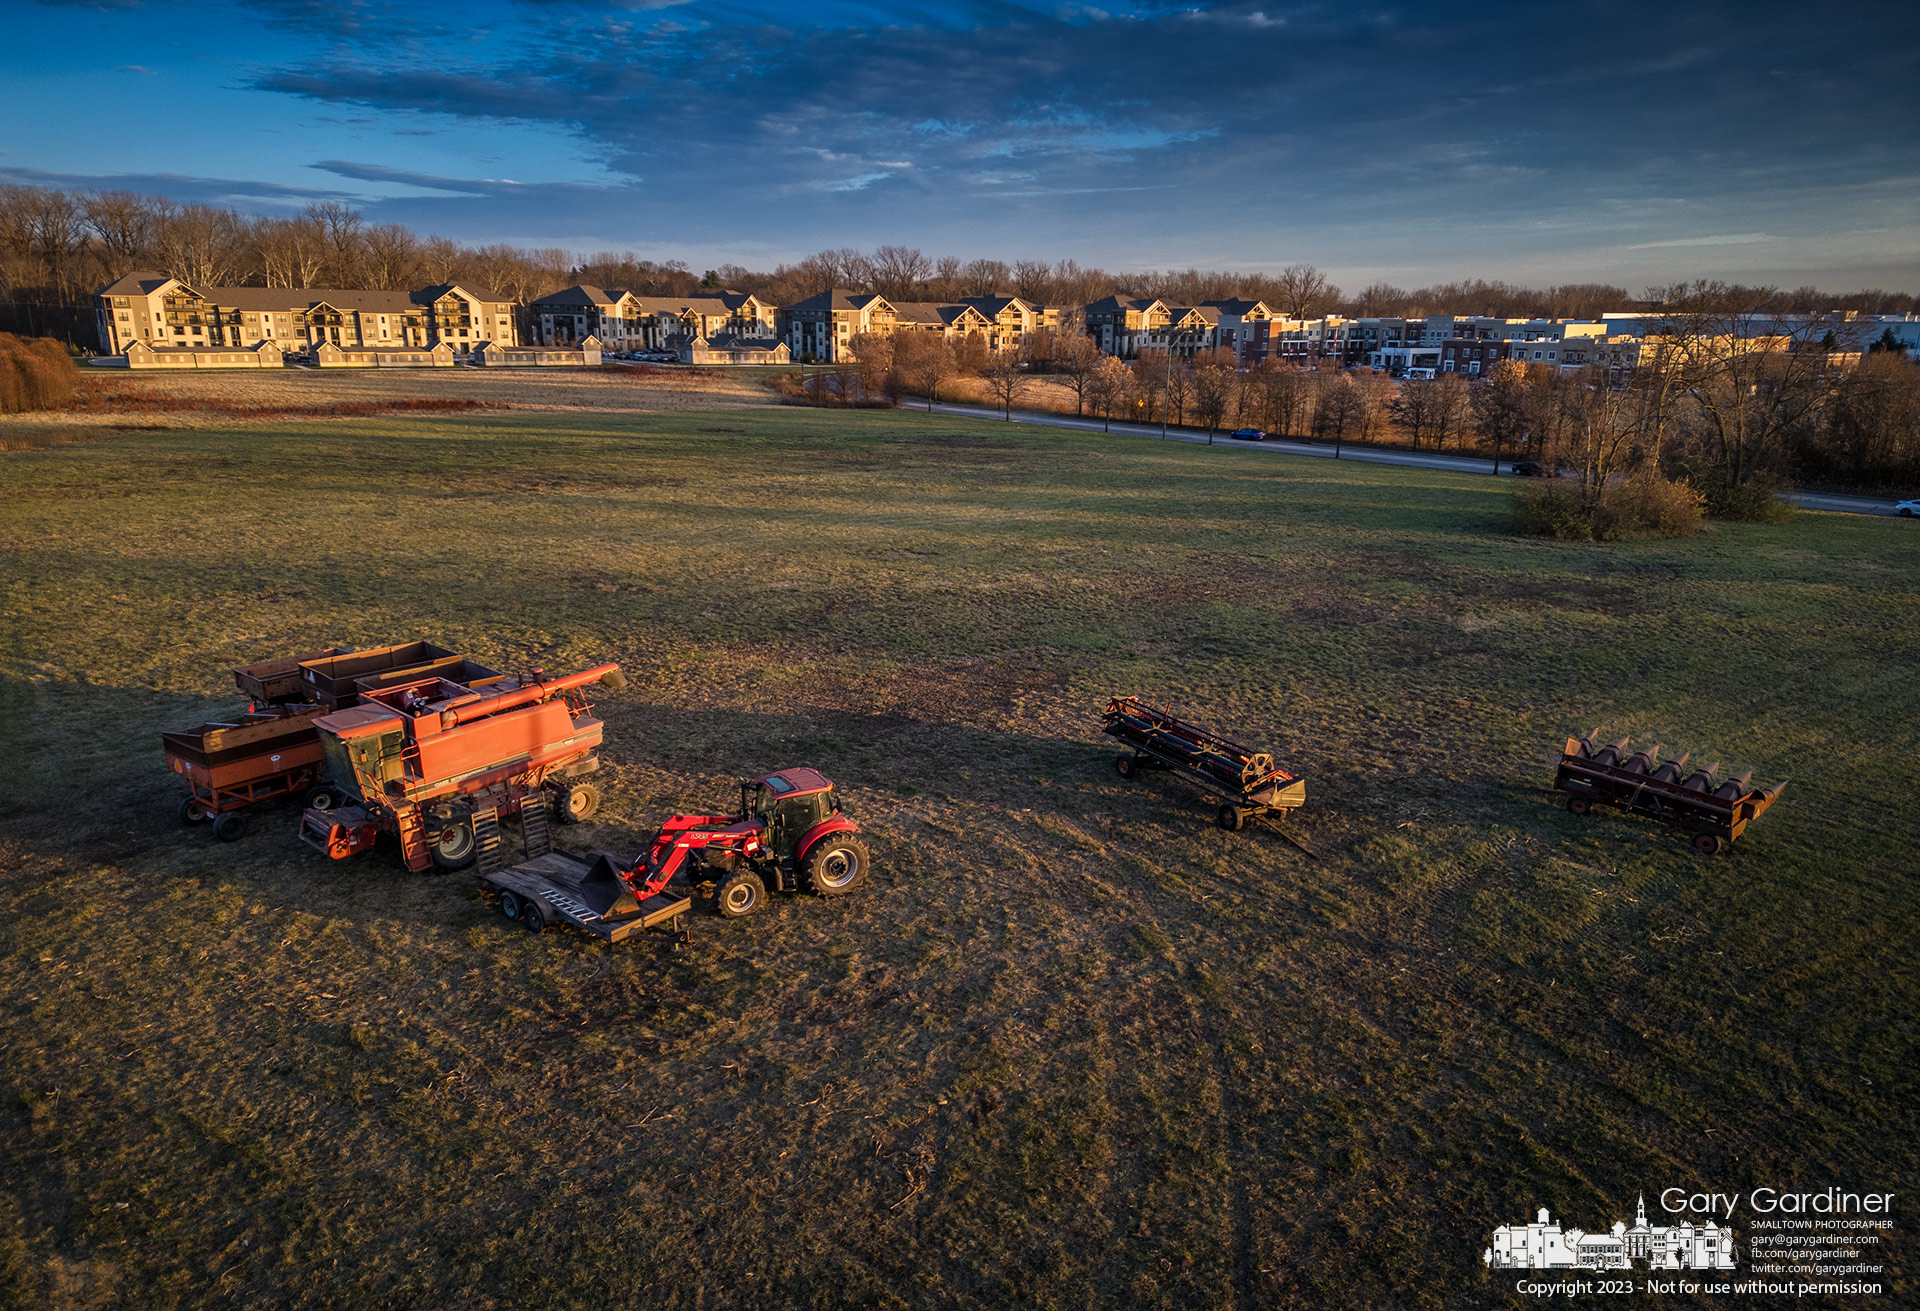 Equipment used to harvest hay, corn, and soybeans on a suburban plot of farm land sits idle at the end of the season in the hay field with an apartment building now occupying what once was farmland. My Final Photo for November 30, 2023.